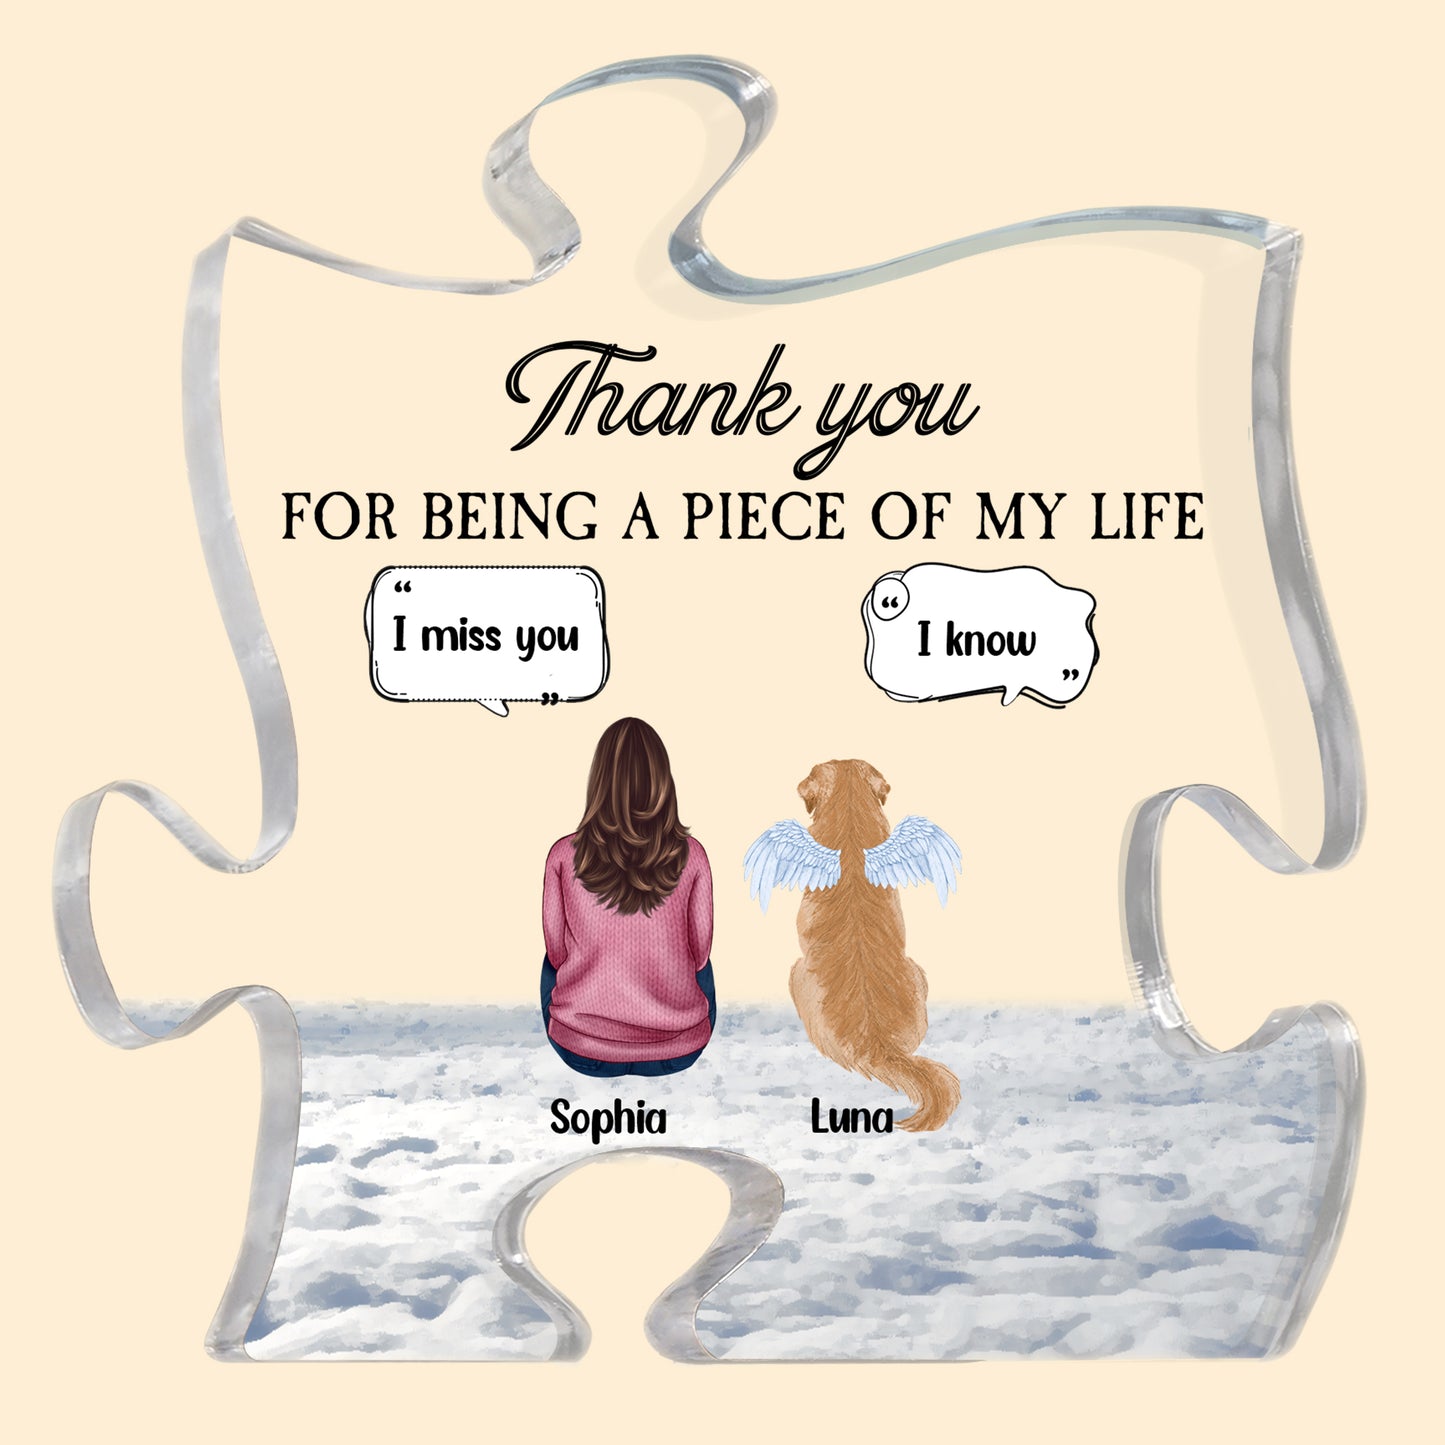 Thank You For Being A Piece Of My Life - Personalized Puzzle Piece Acrylic Plaque